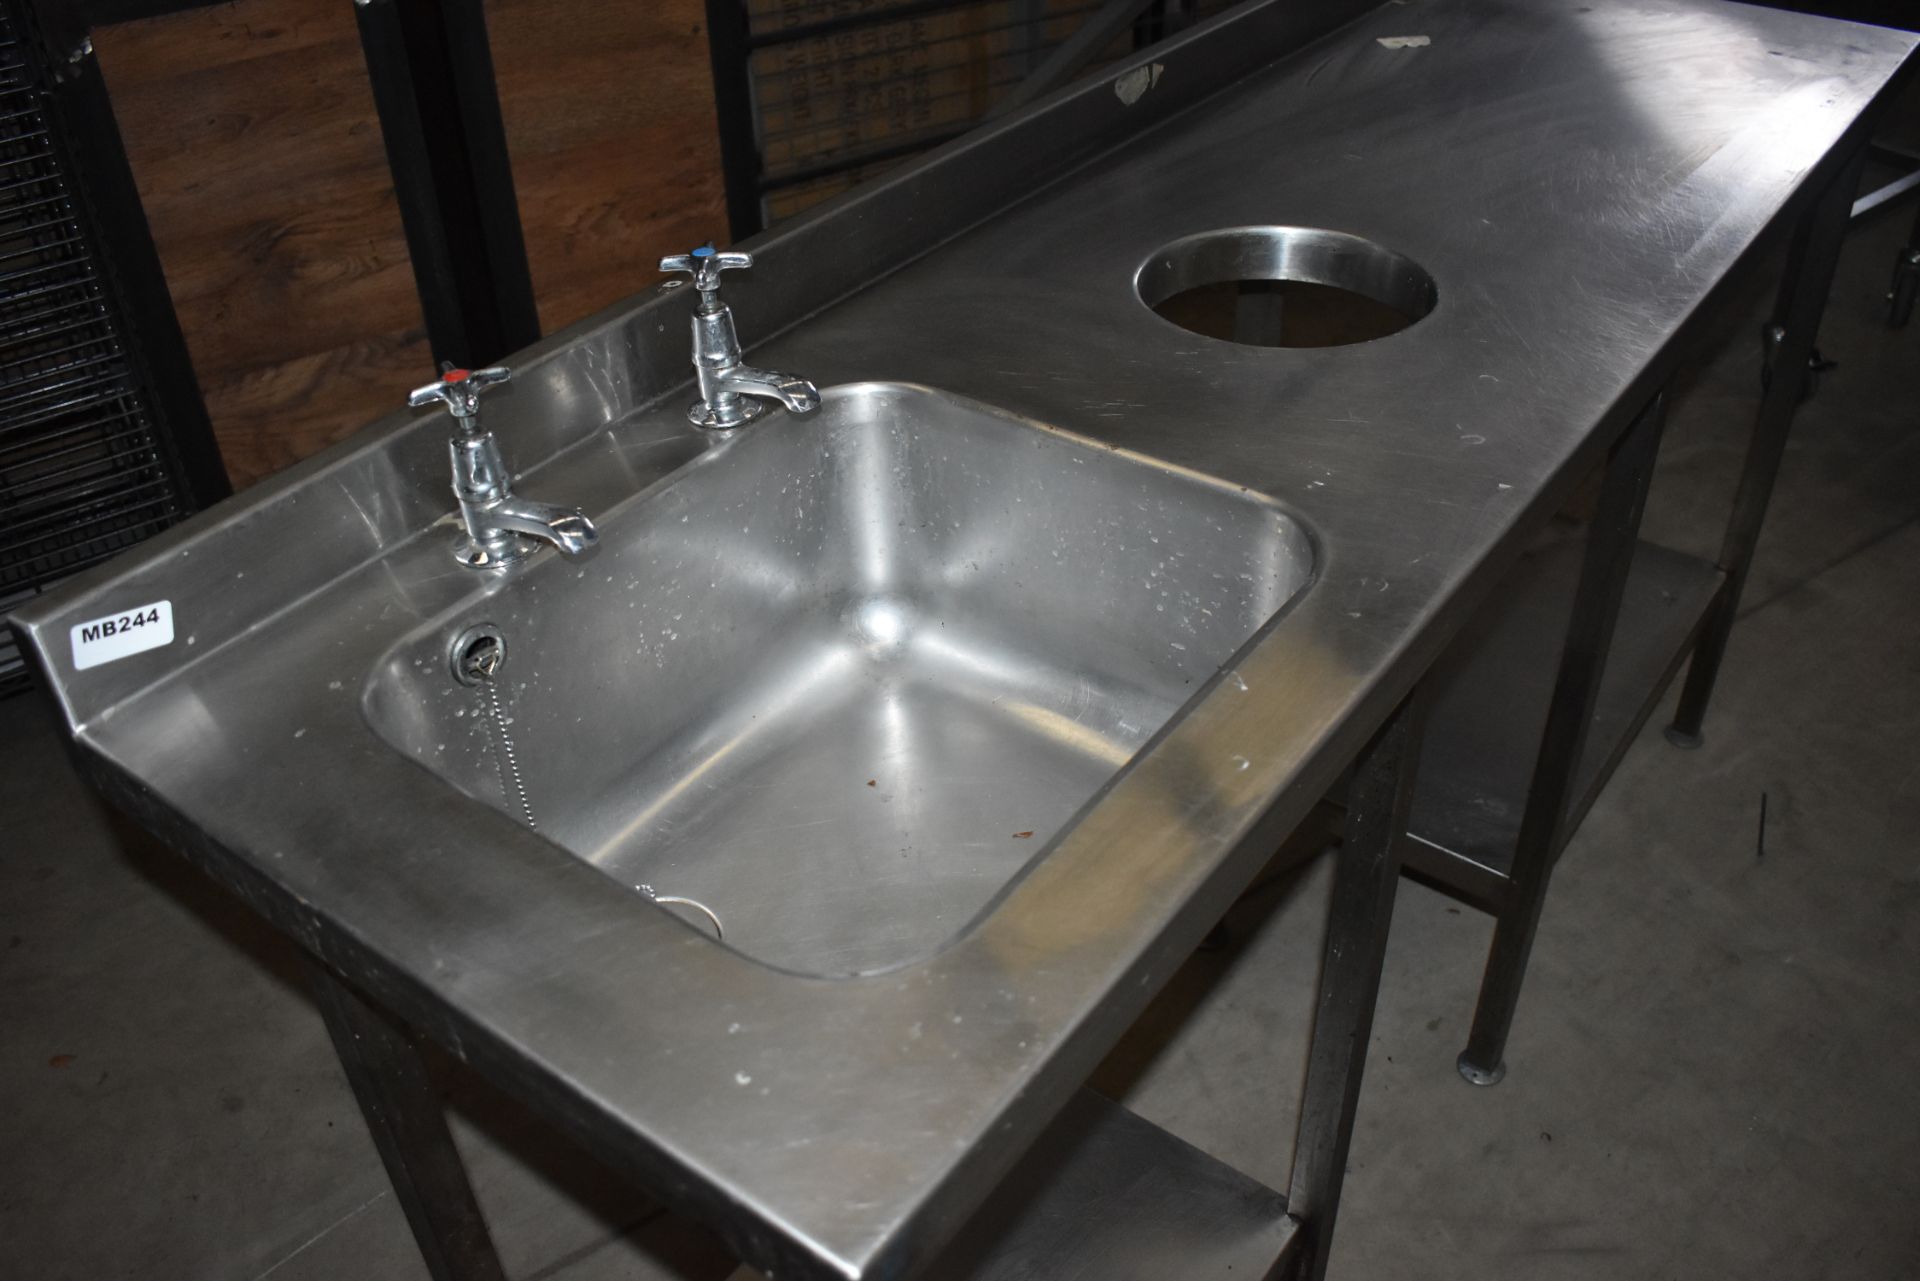 1 x Stainless Steel Wash Basin Prep Table With Undershelves, Upstand, Basin and Taps and Waste Chute - Image 5 of 5